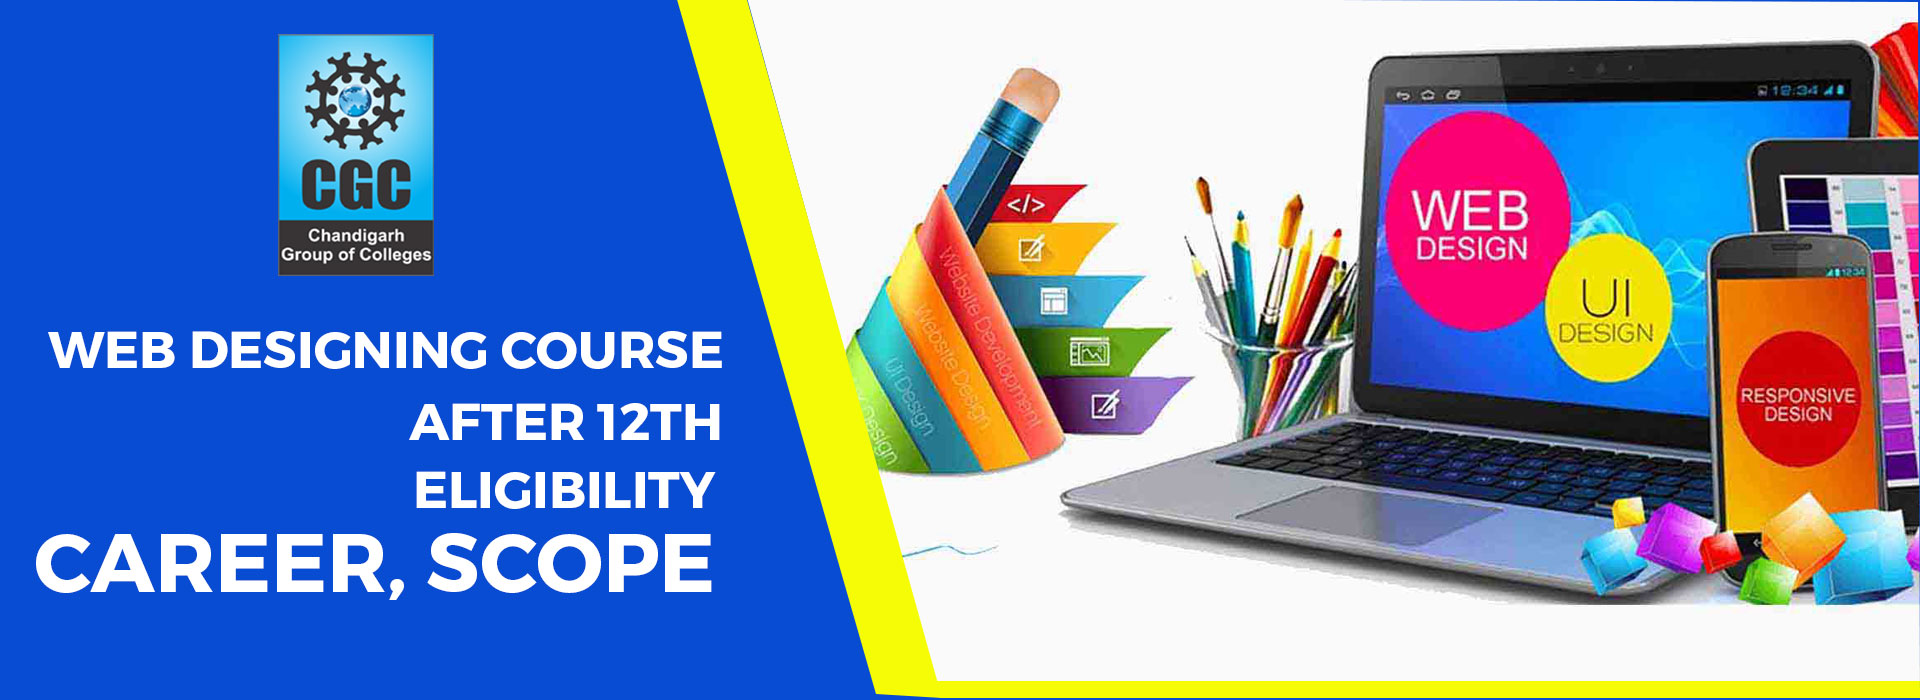 Web Designing Course after 12th: Eligibility, Career, Scope 